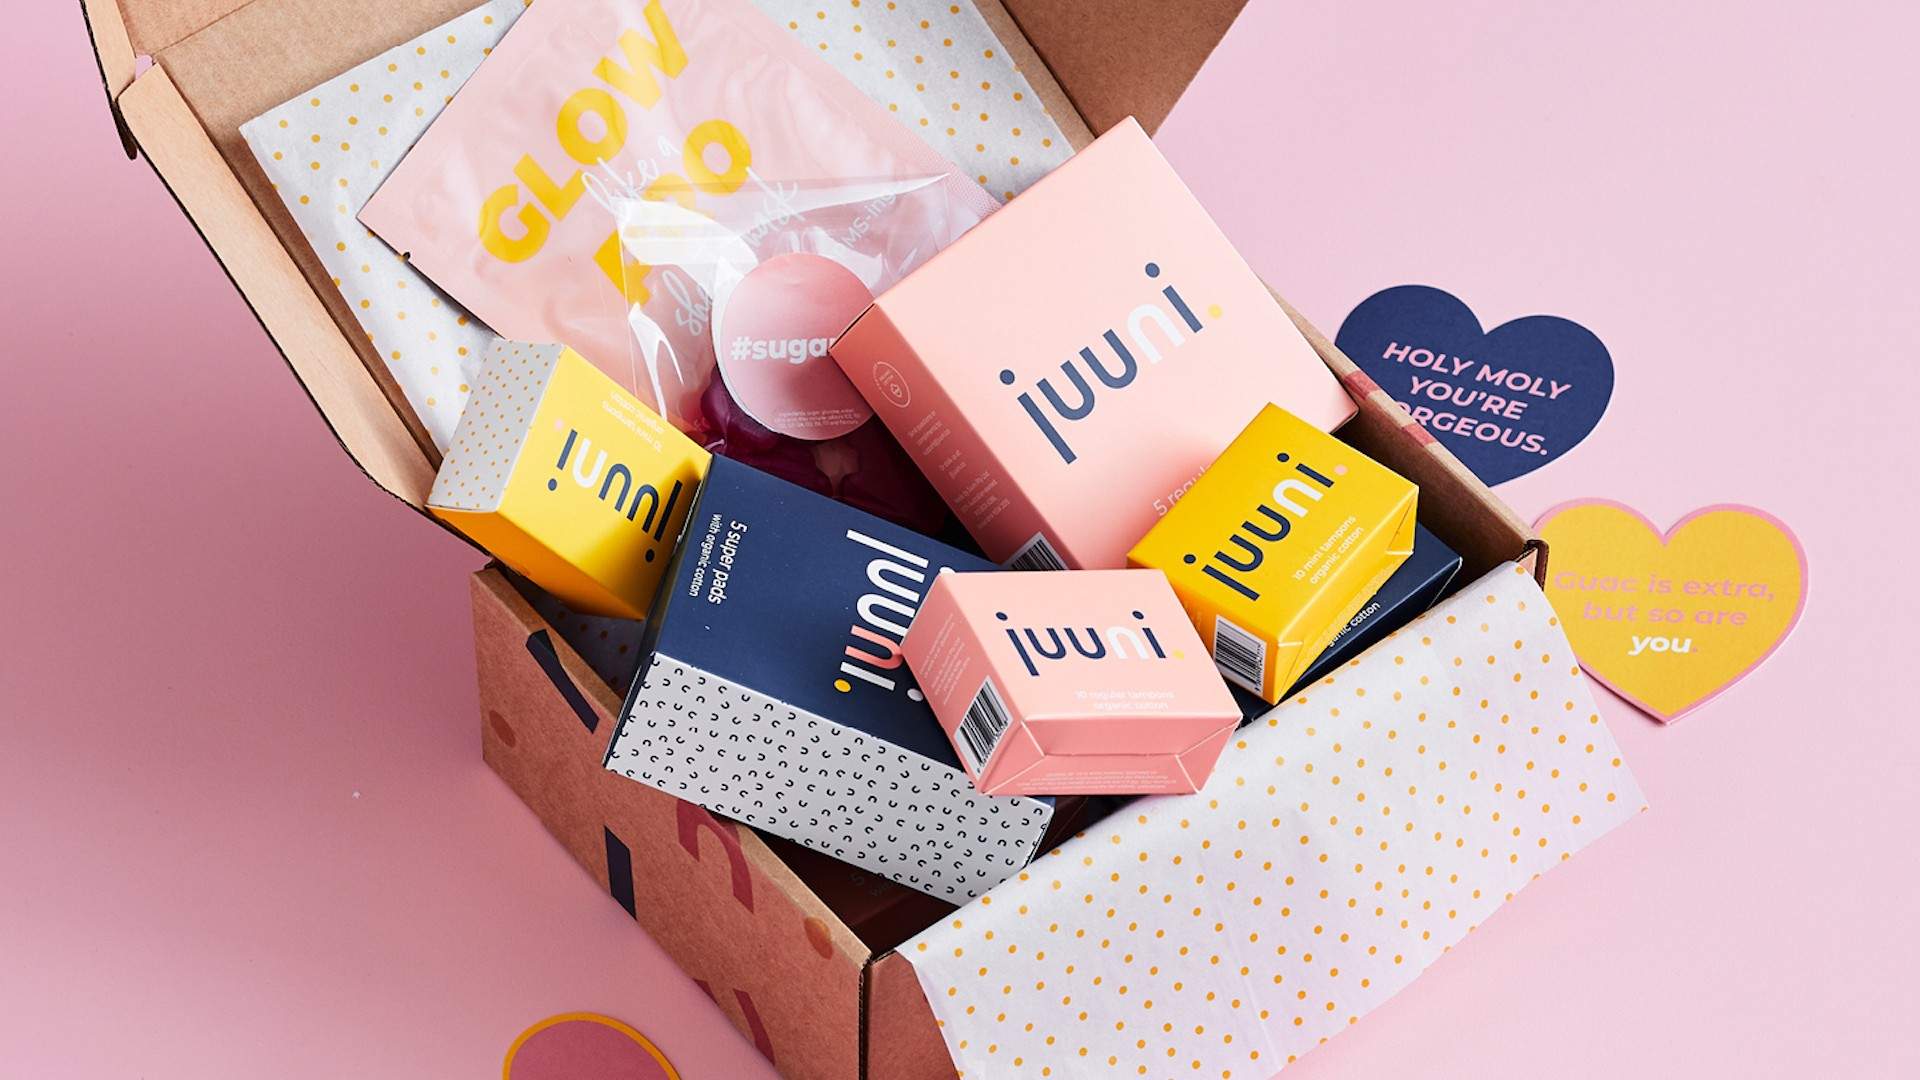 Organic Pad and Tampon Subscription Service Juuni Is Giving Away Free Period and Skincare Products